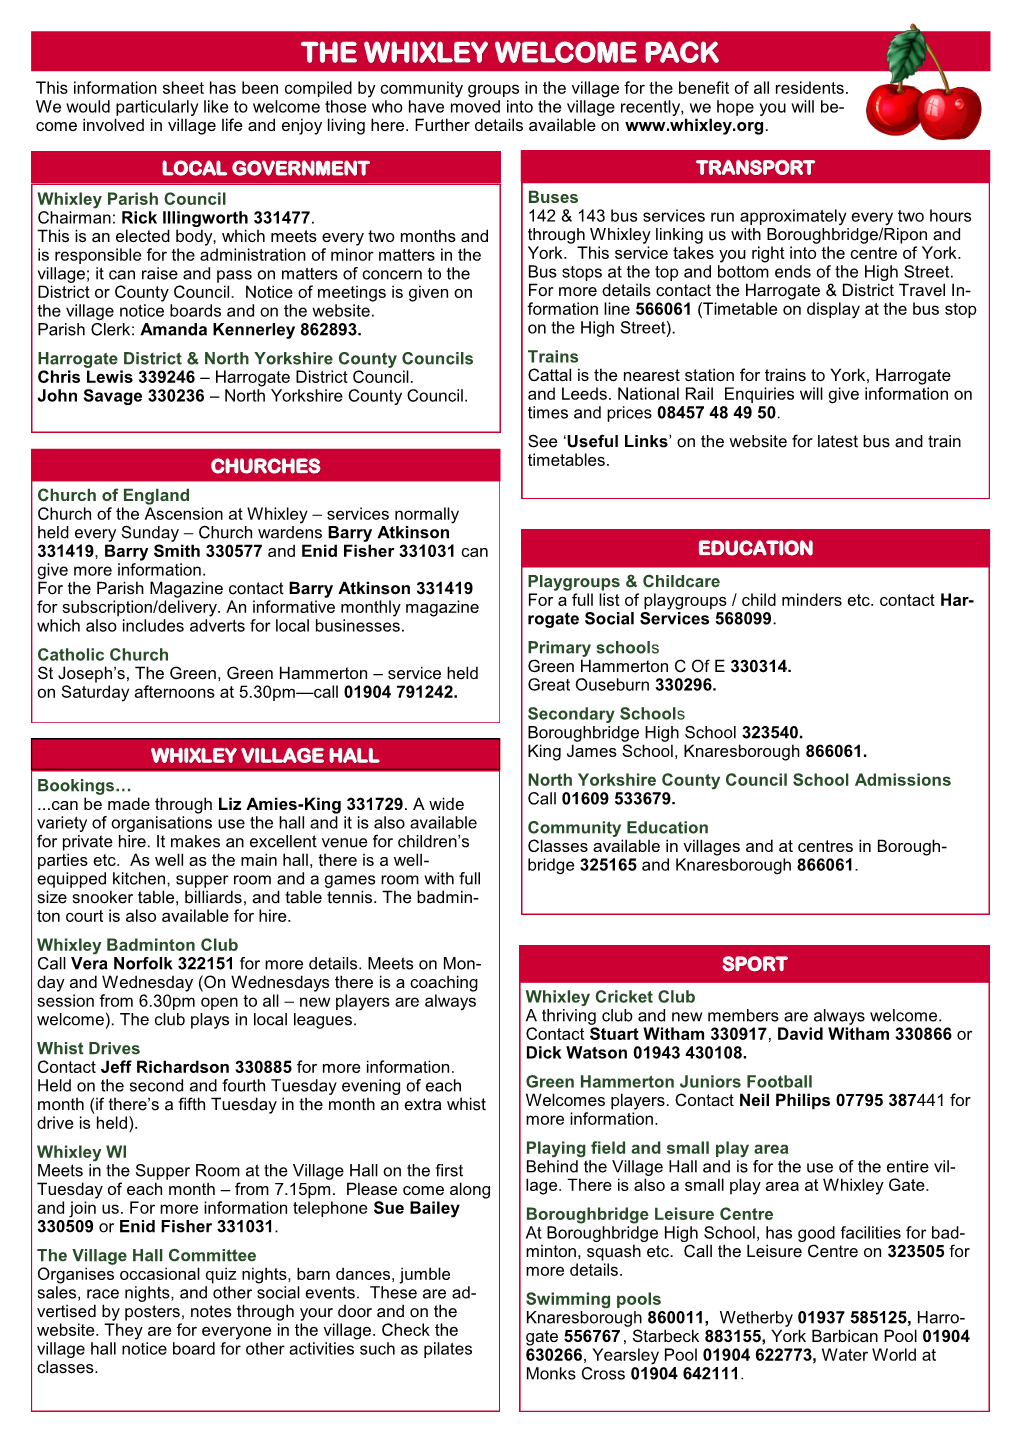 THE WHIXLEY WELCOME PACK This Information Sheet Has Been Compiled by Community Groups in the Village for the Benefit of All Residents